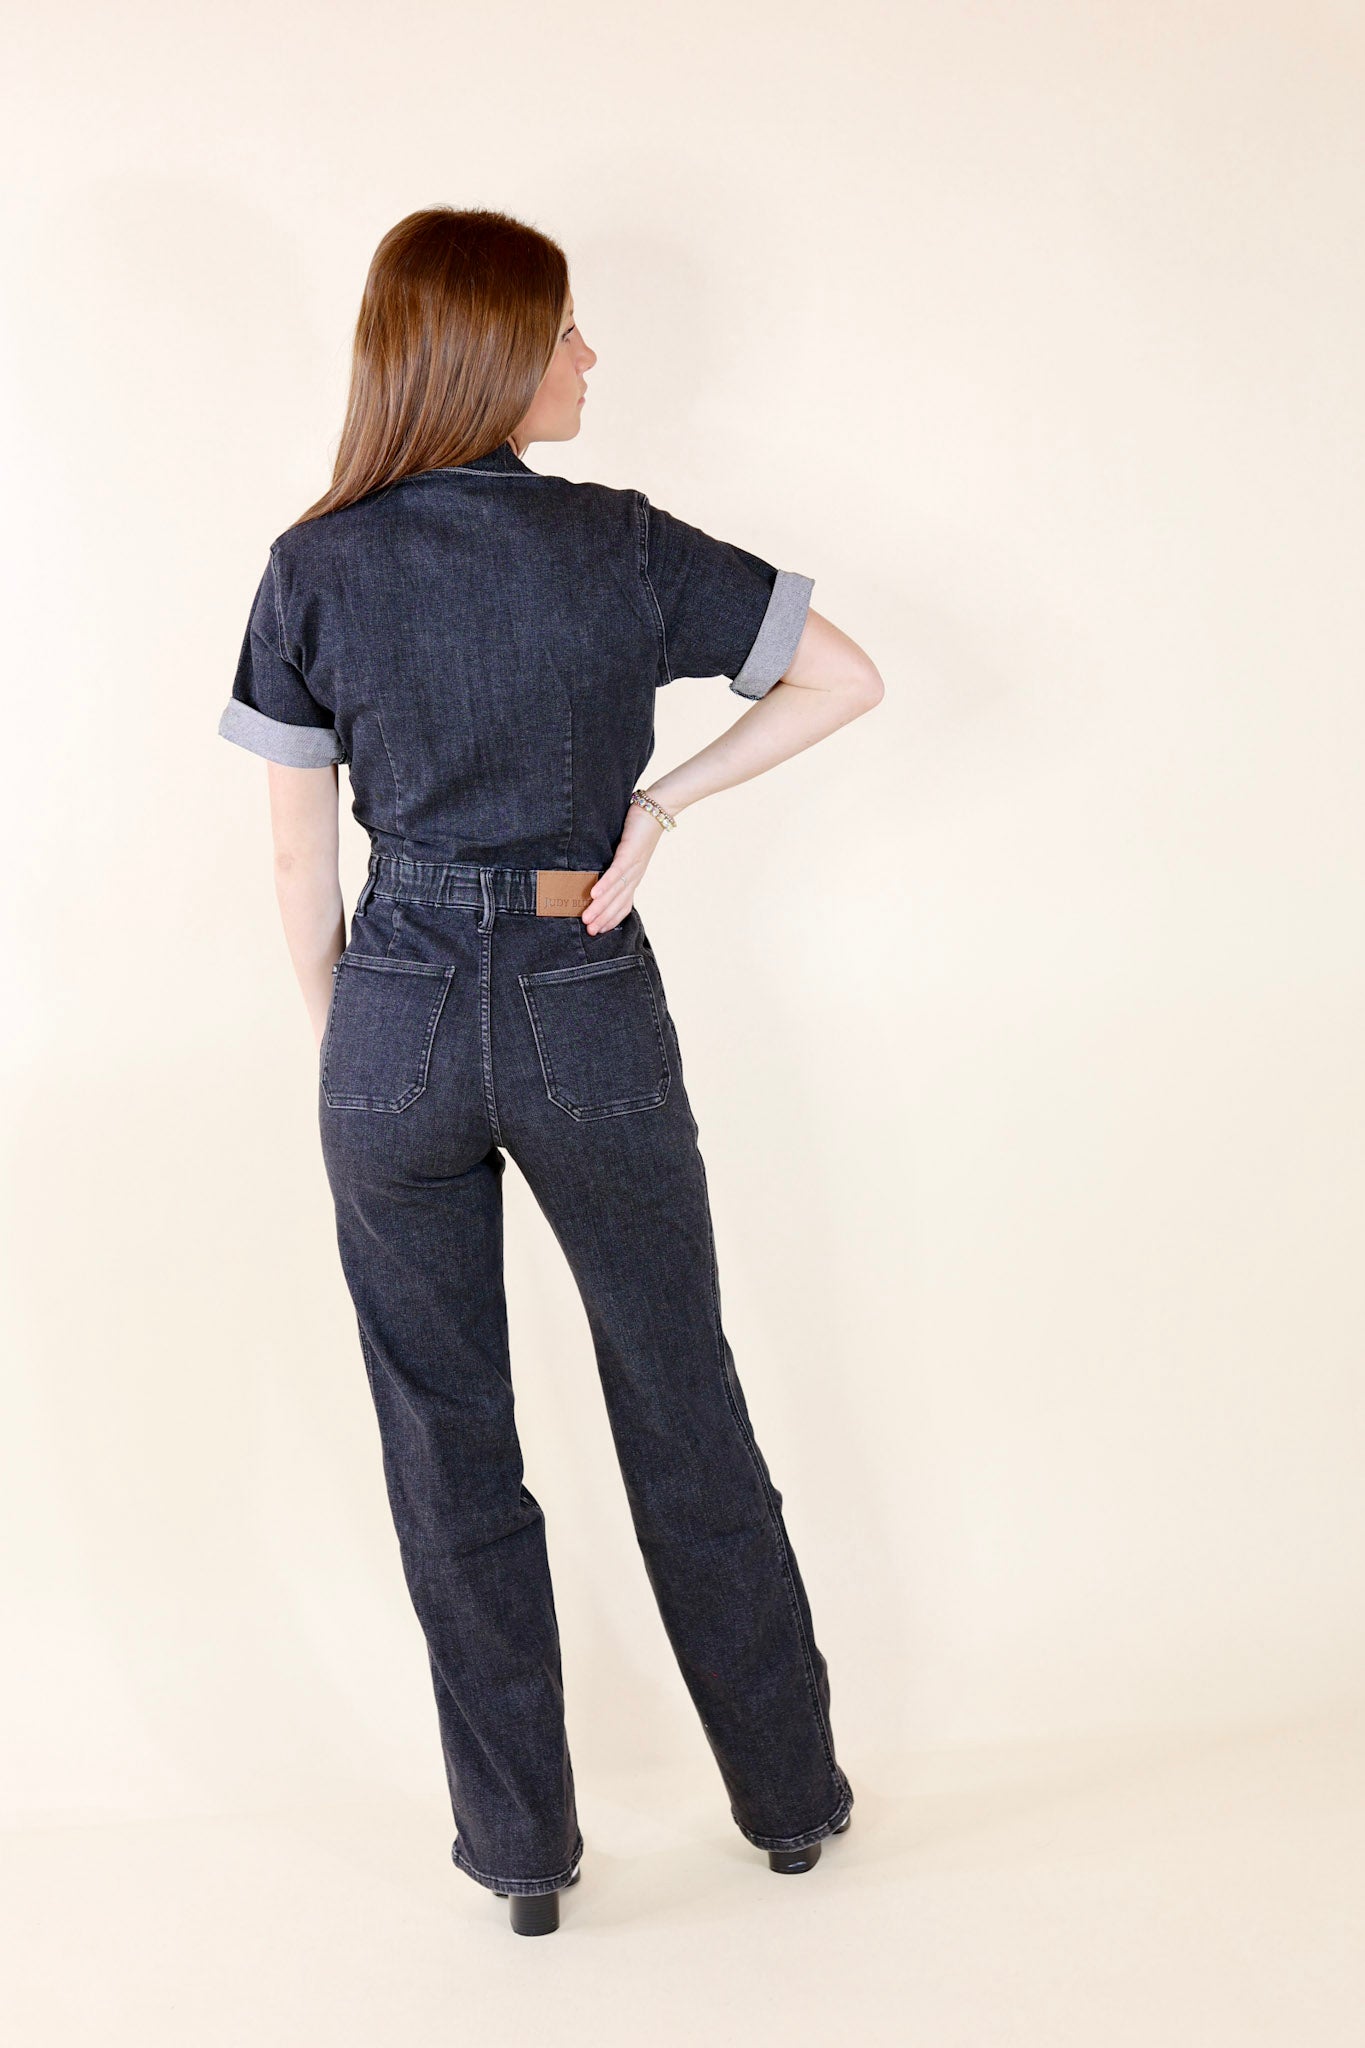 Judy Blue | New To The City Short Sleeve Denim Jumpsuit in Black - Giddy Up Glamour Boutique